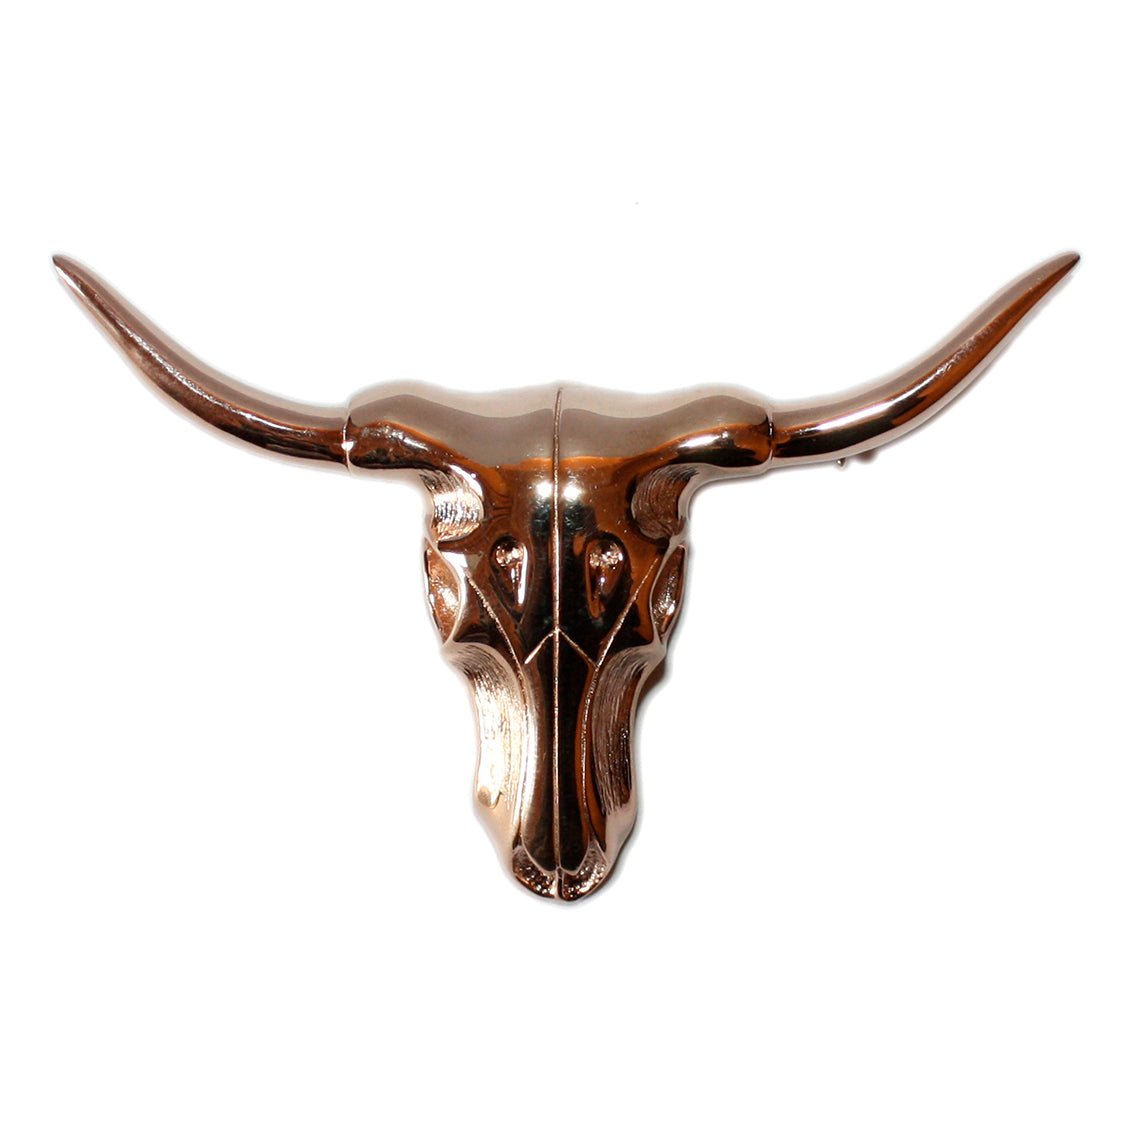 Bijoux - Tess Van Ghert - Picture of a bronze brooch in the shape of a bull head with horns